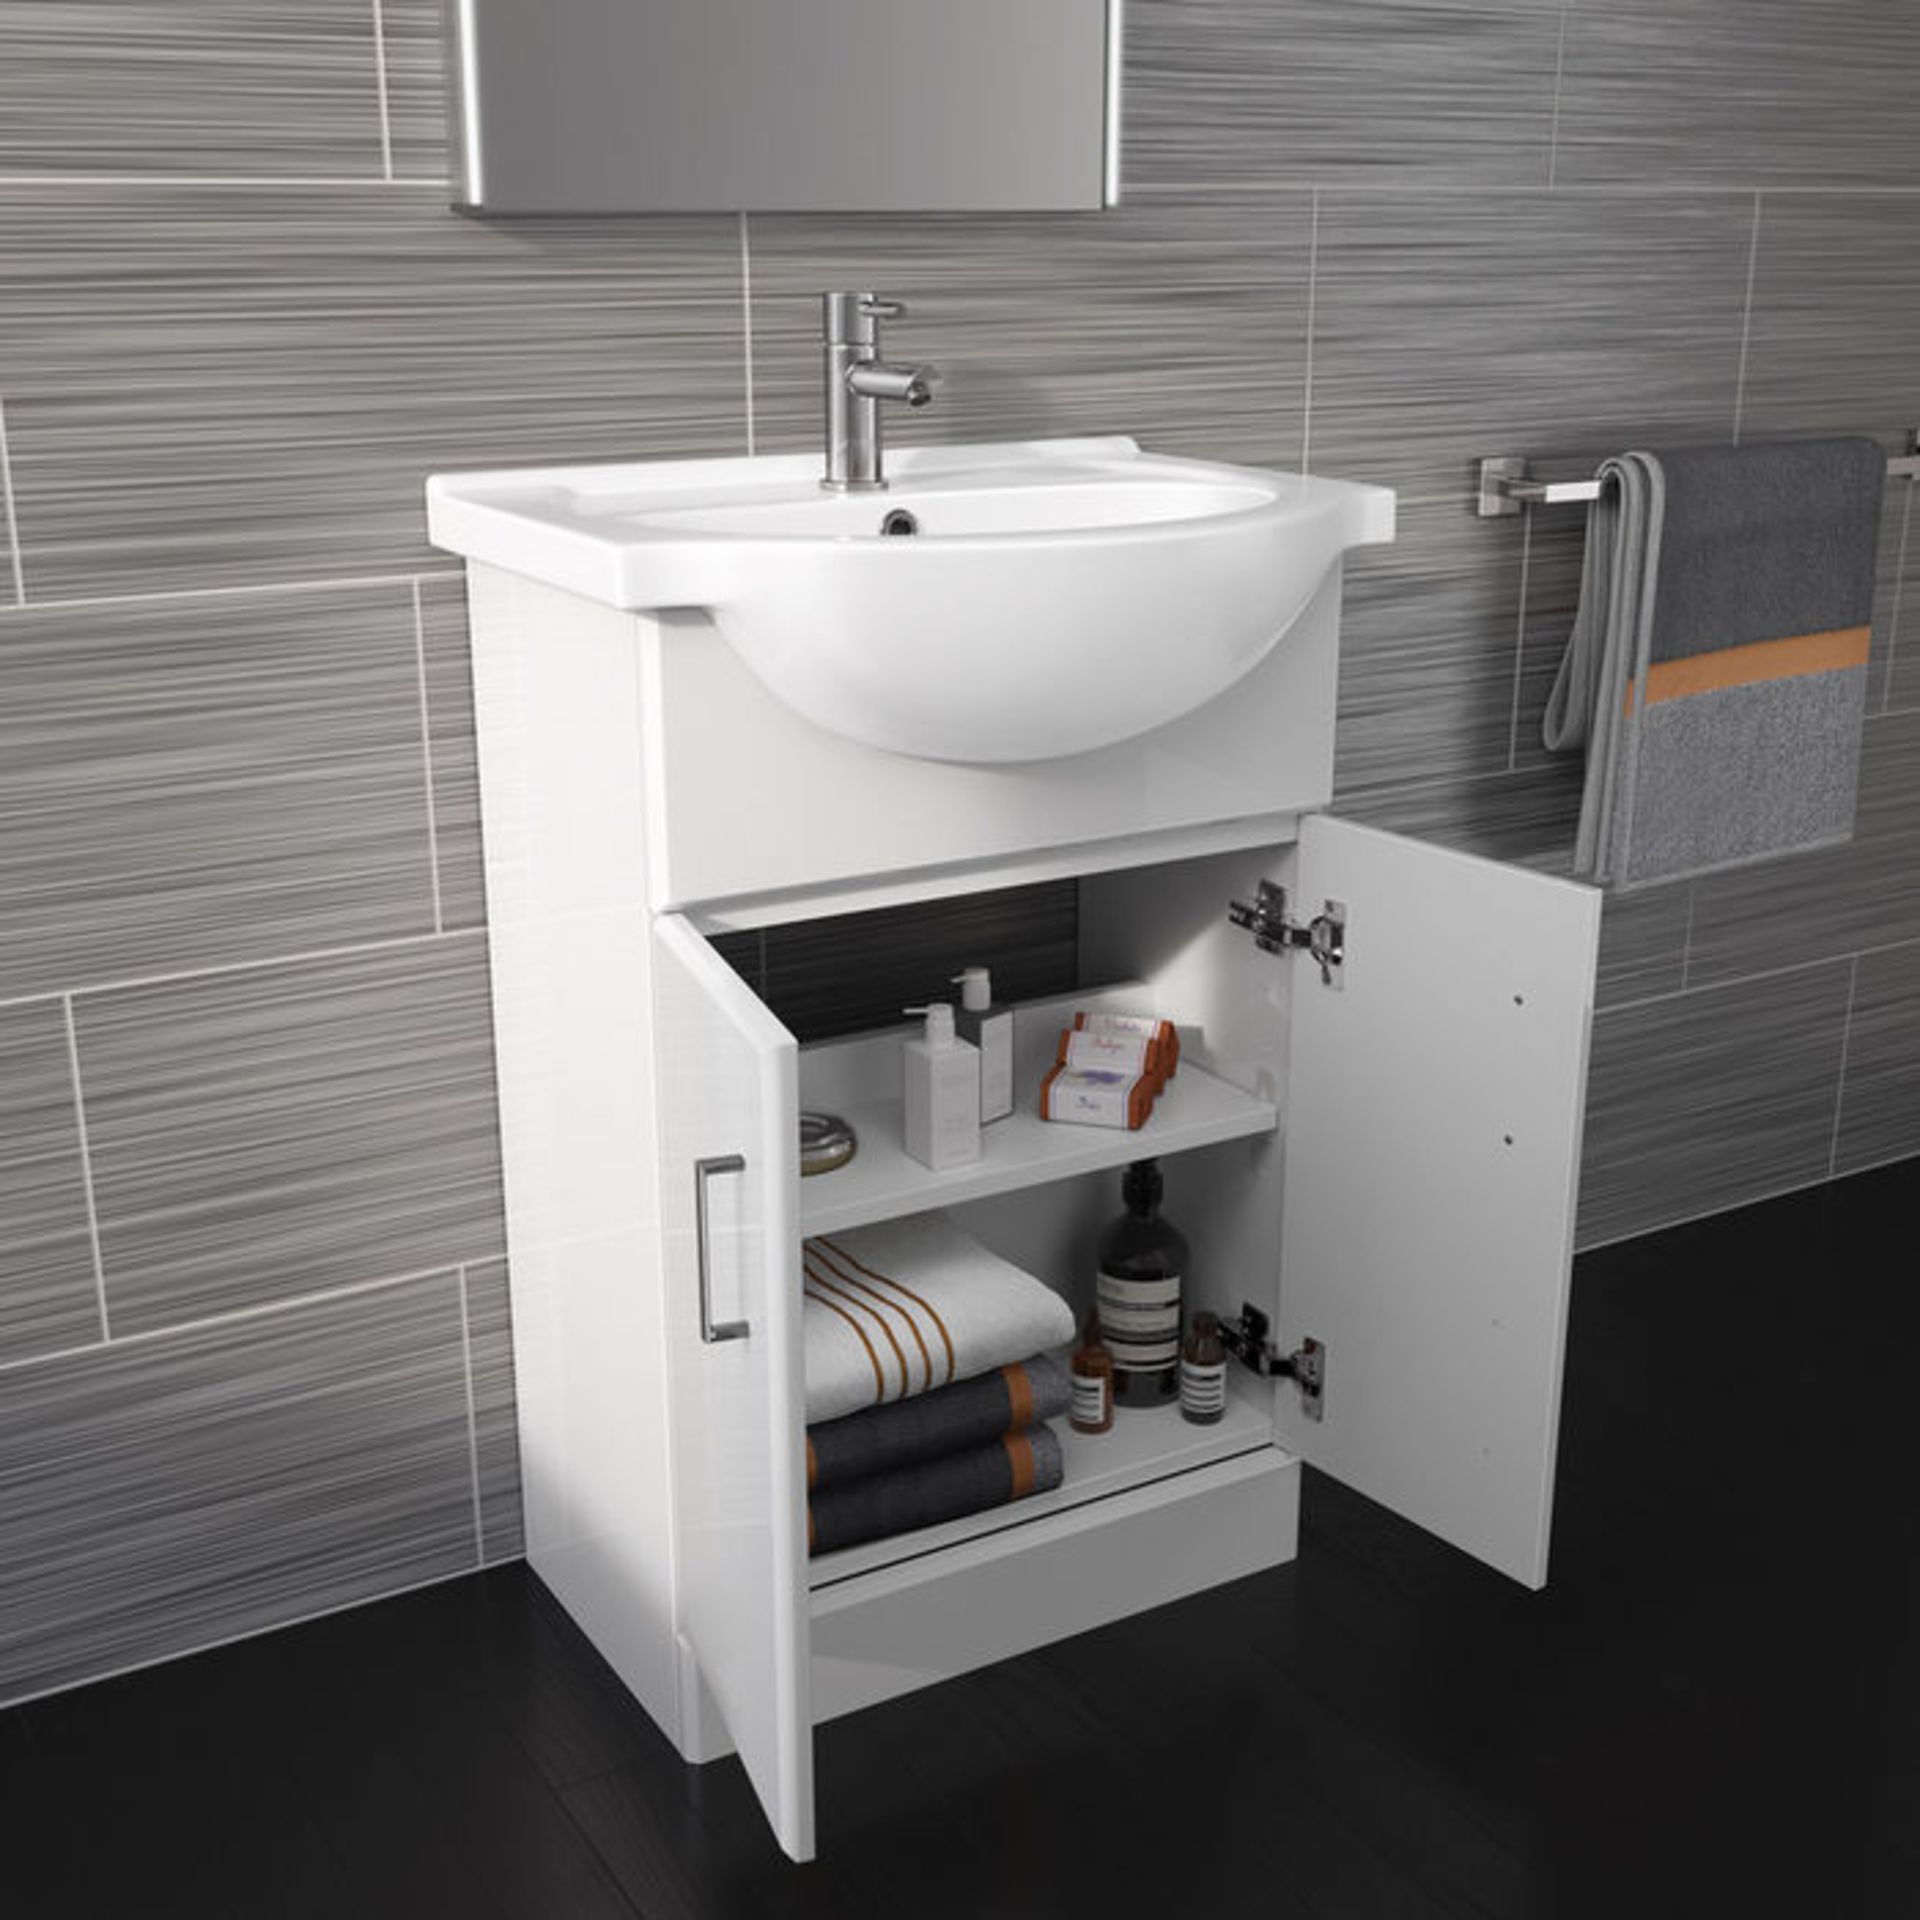 (L91) 550x300mm Quartz Gloss White Built In Basin Cabinet. RRP £349.99. COMES COMPLETE WITH BASIN. - Image 3 of 3